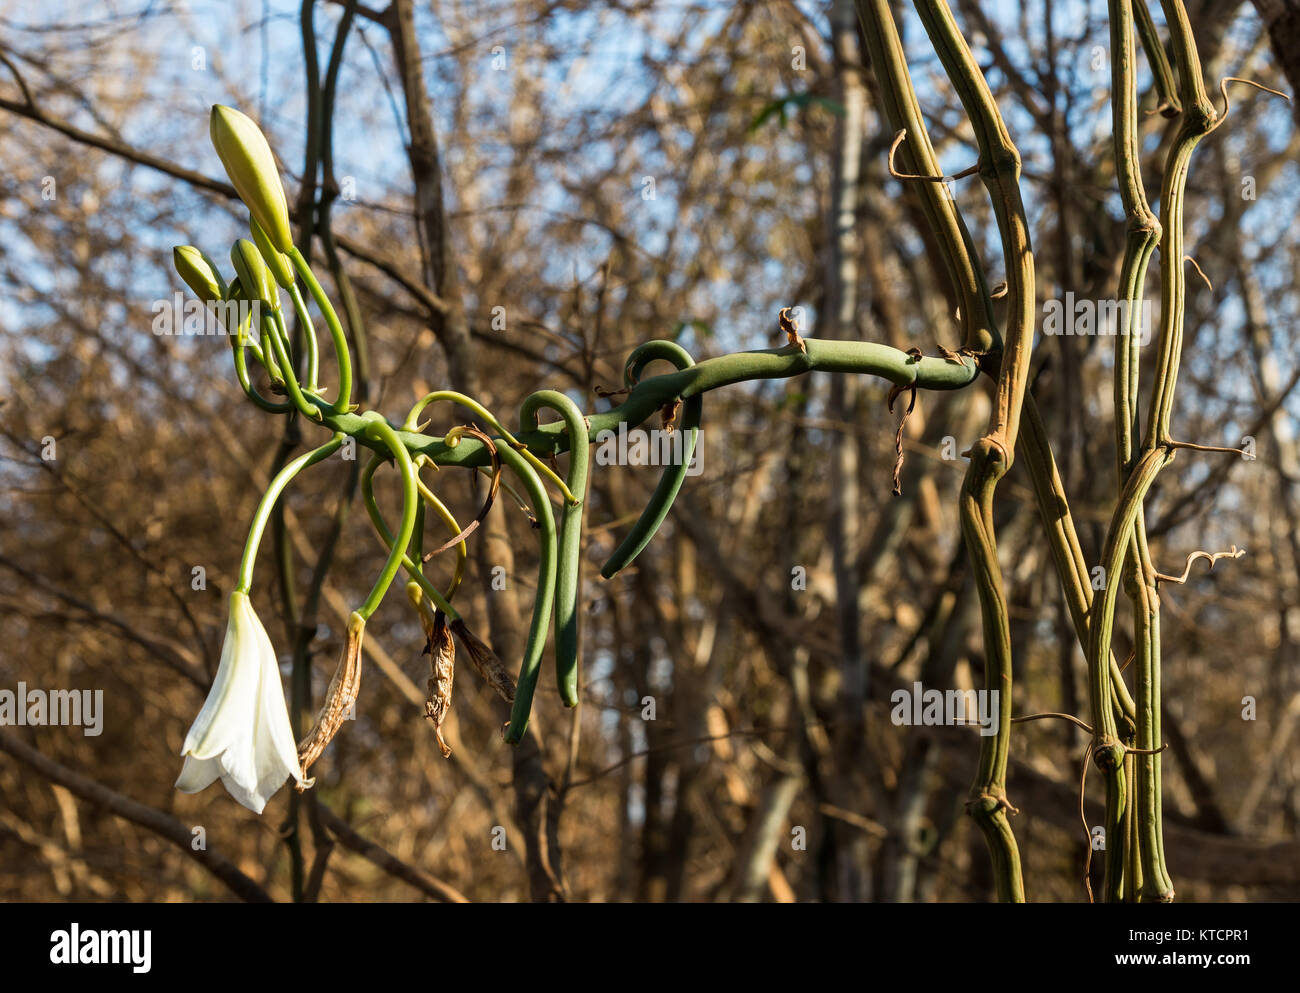 A native Vanilla orchid with white flower blooms in the wild. Madagascar, Africa. Stock Photo